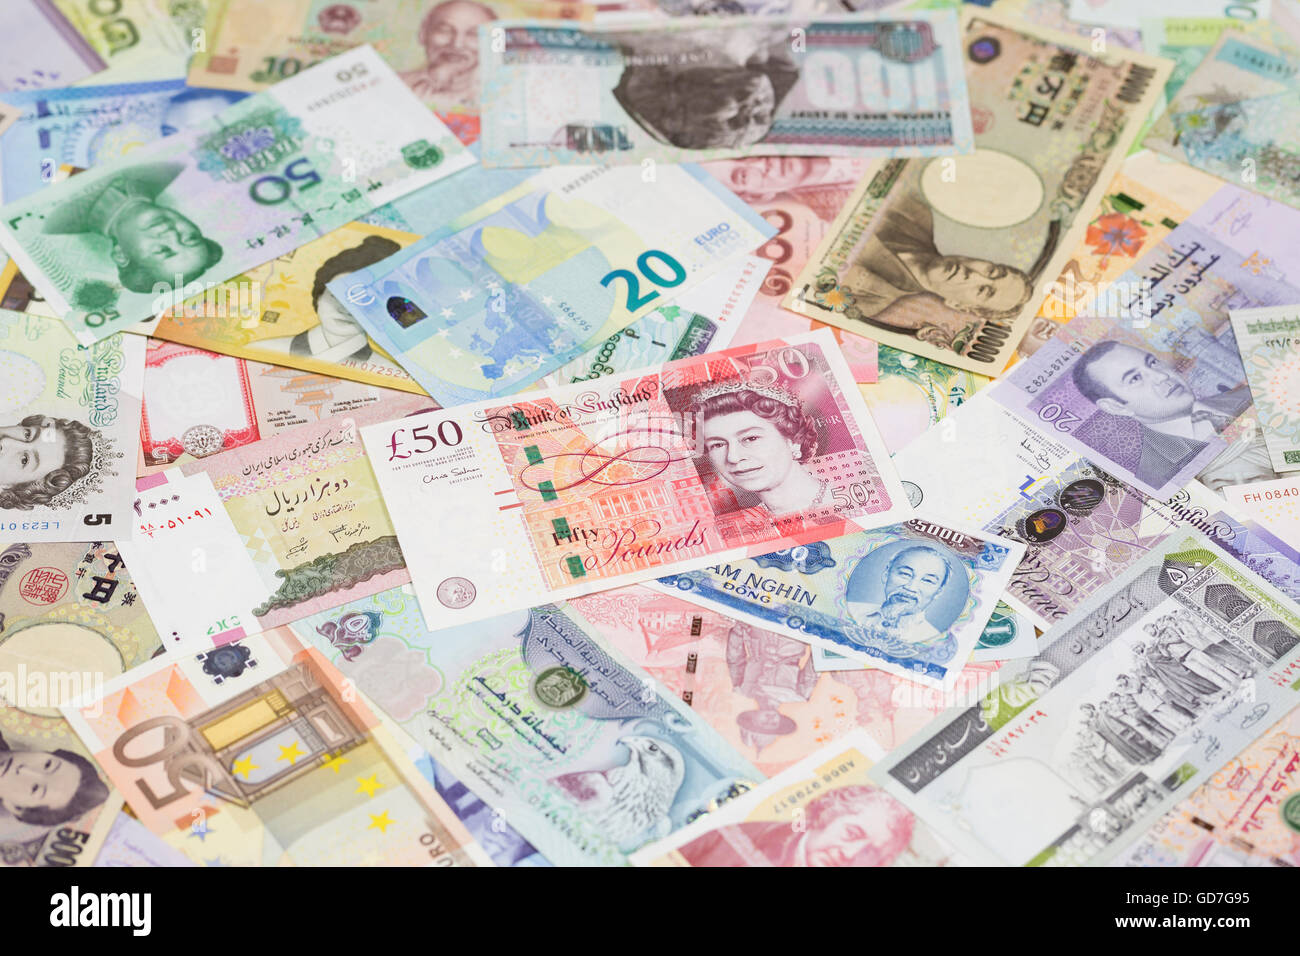 International currency banknotes Stock Photo